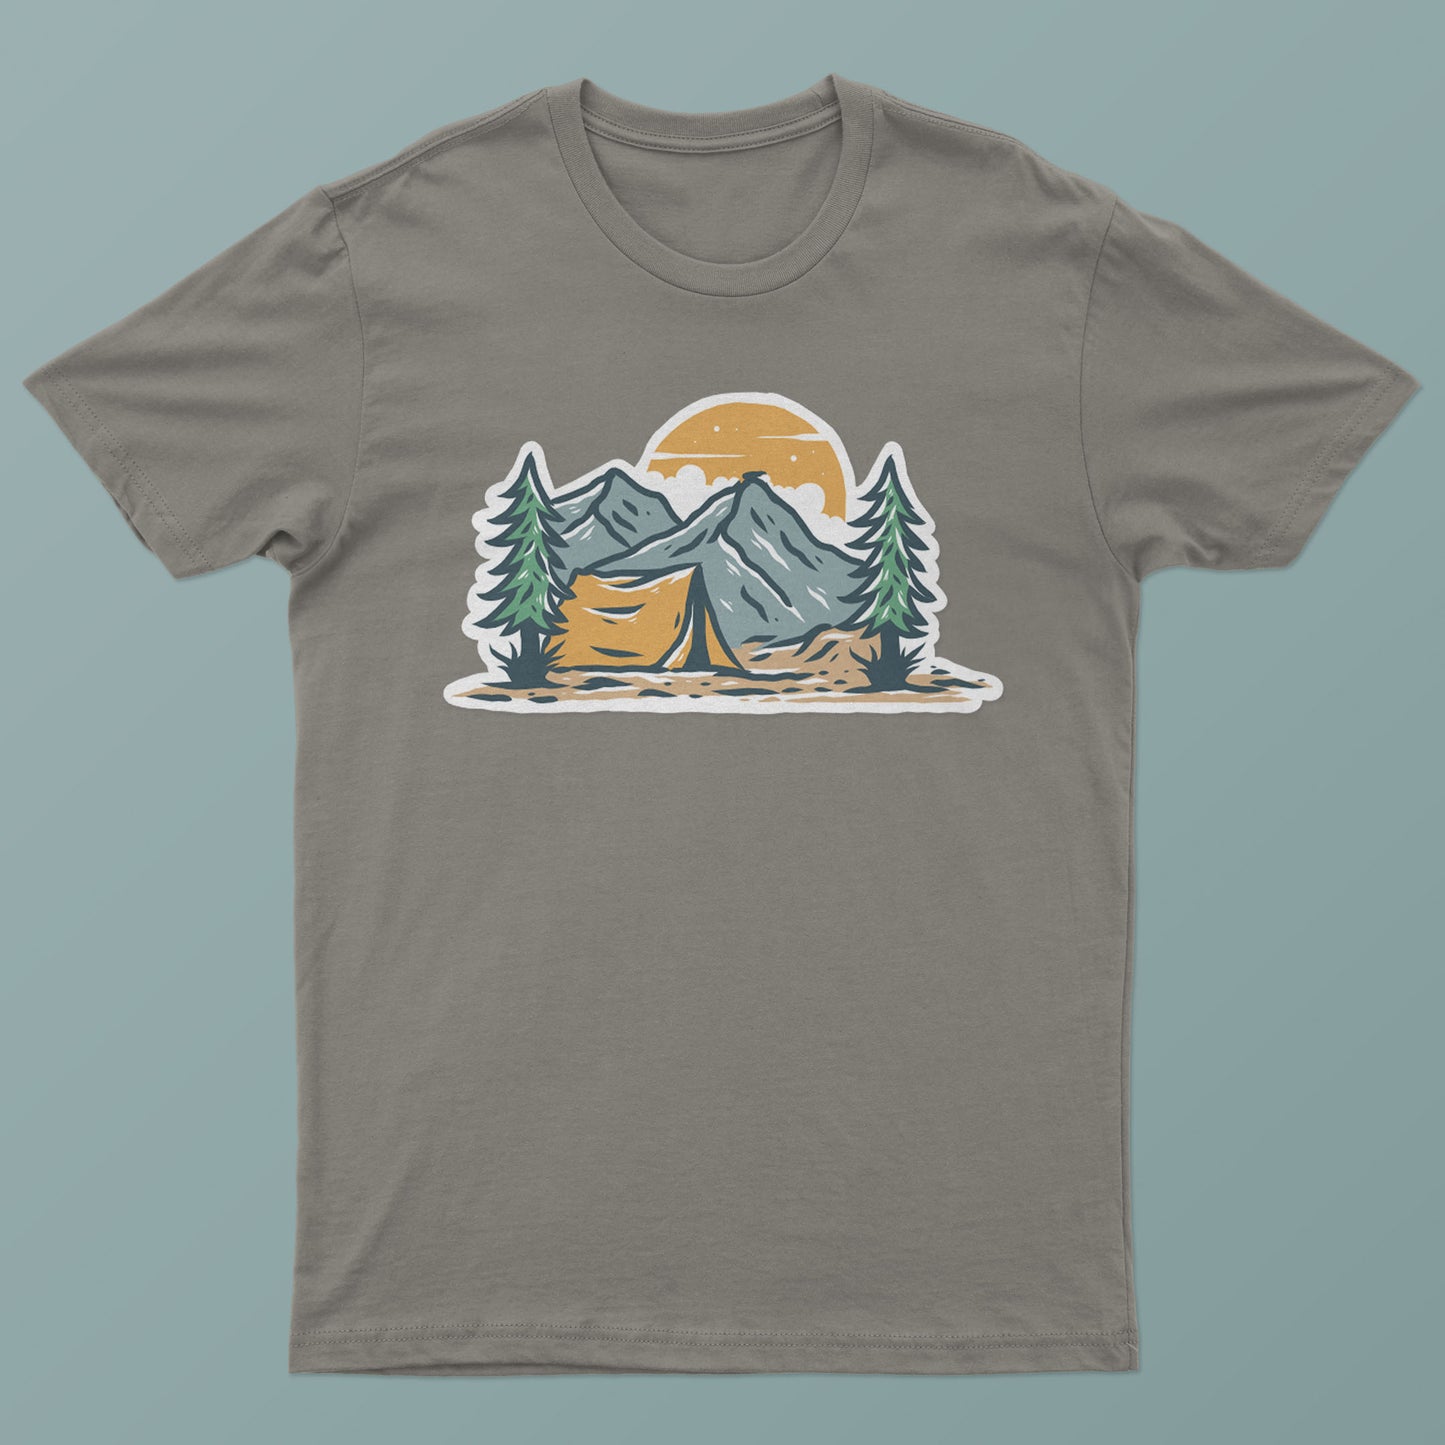 Vintage Camp Hiker Graphic Tee - S-XXXL, Various Colors, Free Shipping